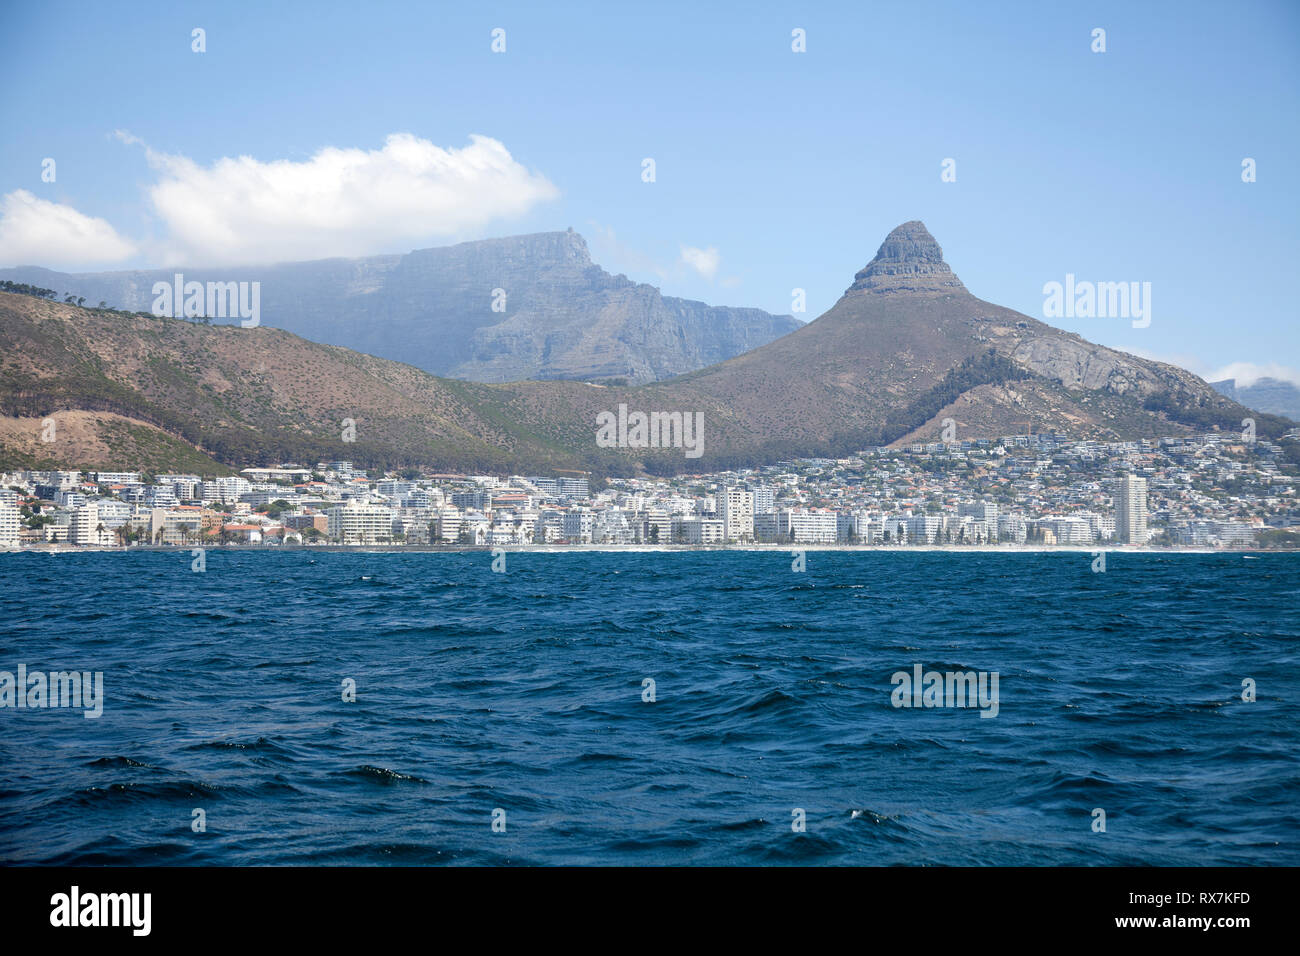 Properties on Seaside With Lions Head Behind in Cape Town, South Africa Stock Photo